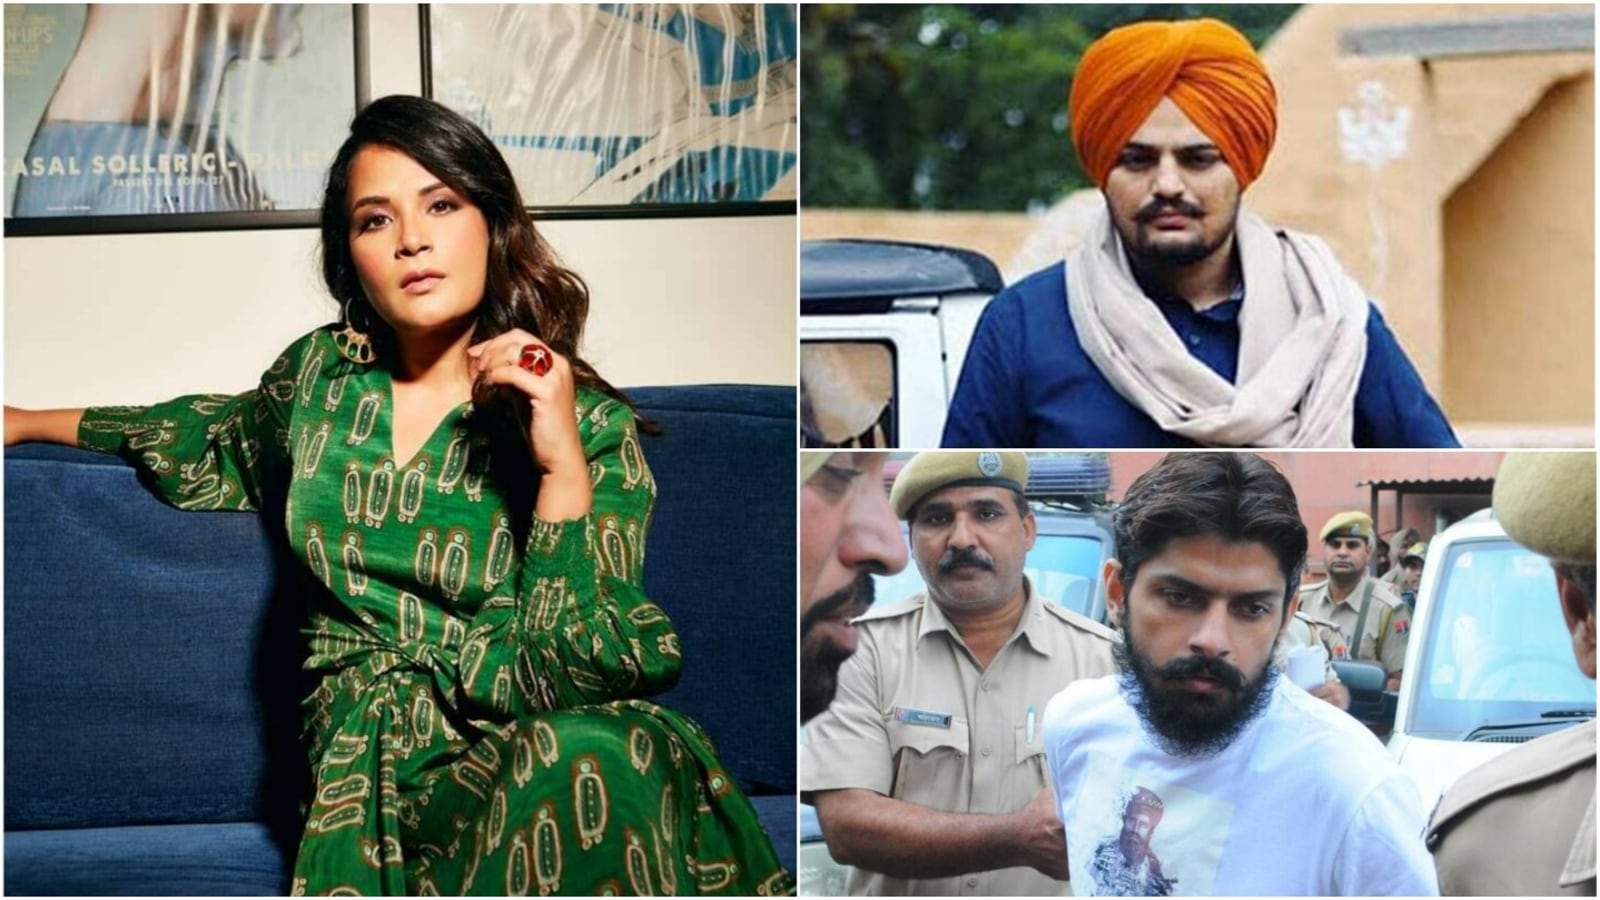 Richa Chadha questions Lawrence Bishnoi’s security cover: ‘Two guards for Sidhu Moose Waala, ten for Bishnoi’